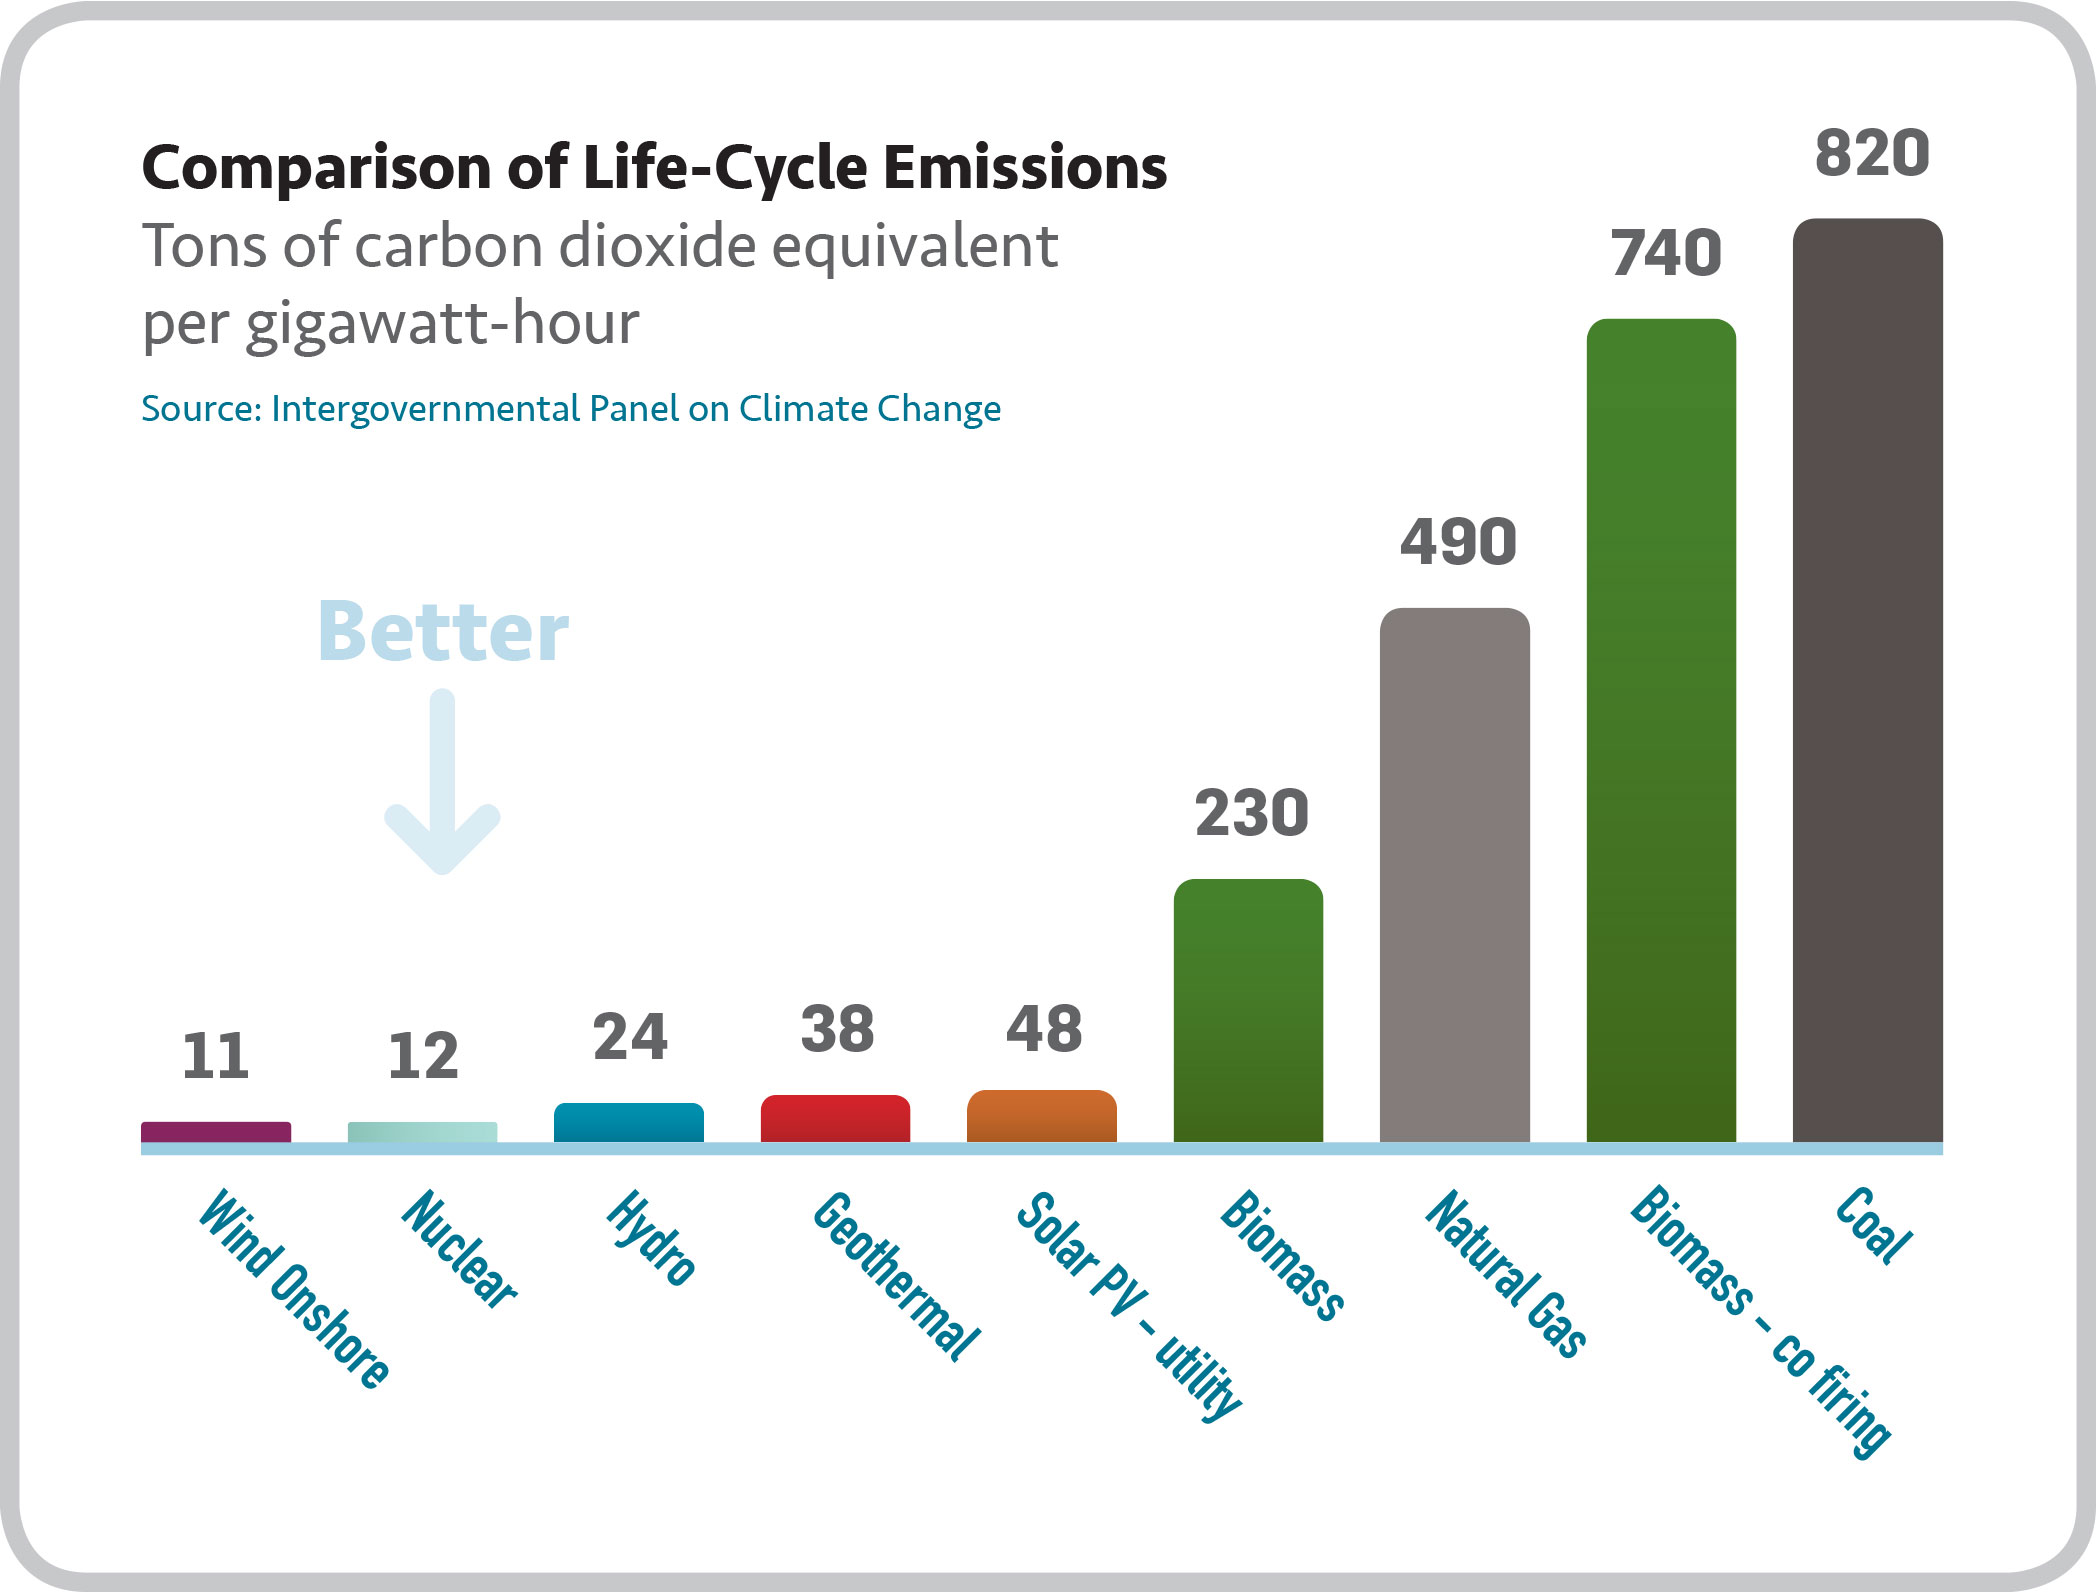 Comparison of Life-Cycle Emissions: Tons of Carbon dioxide equivalent per gigawatt hour